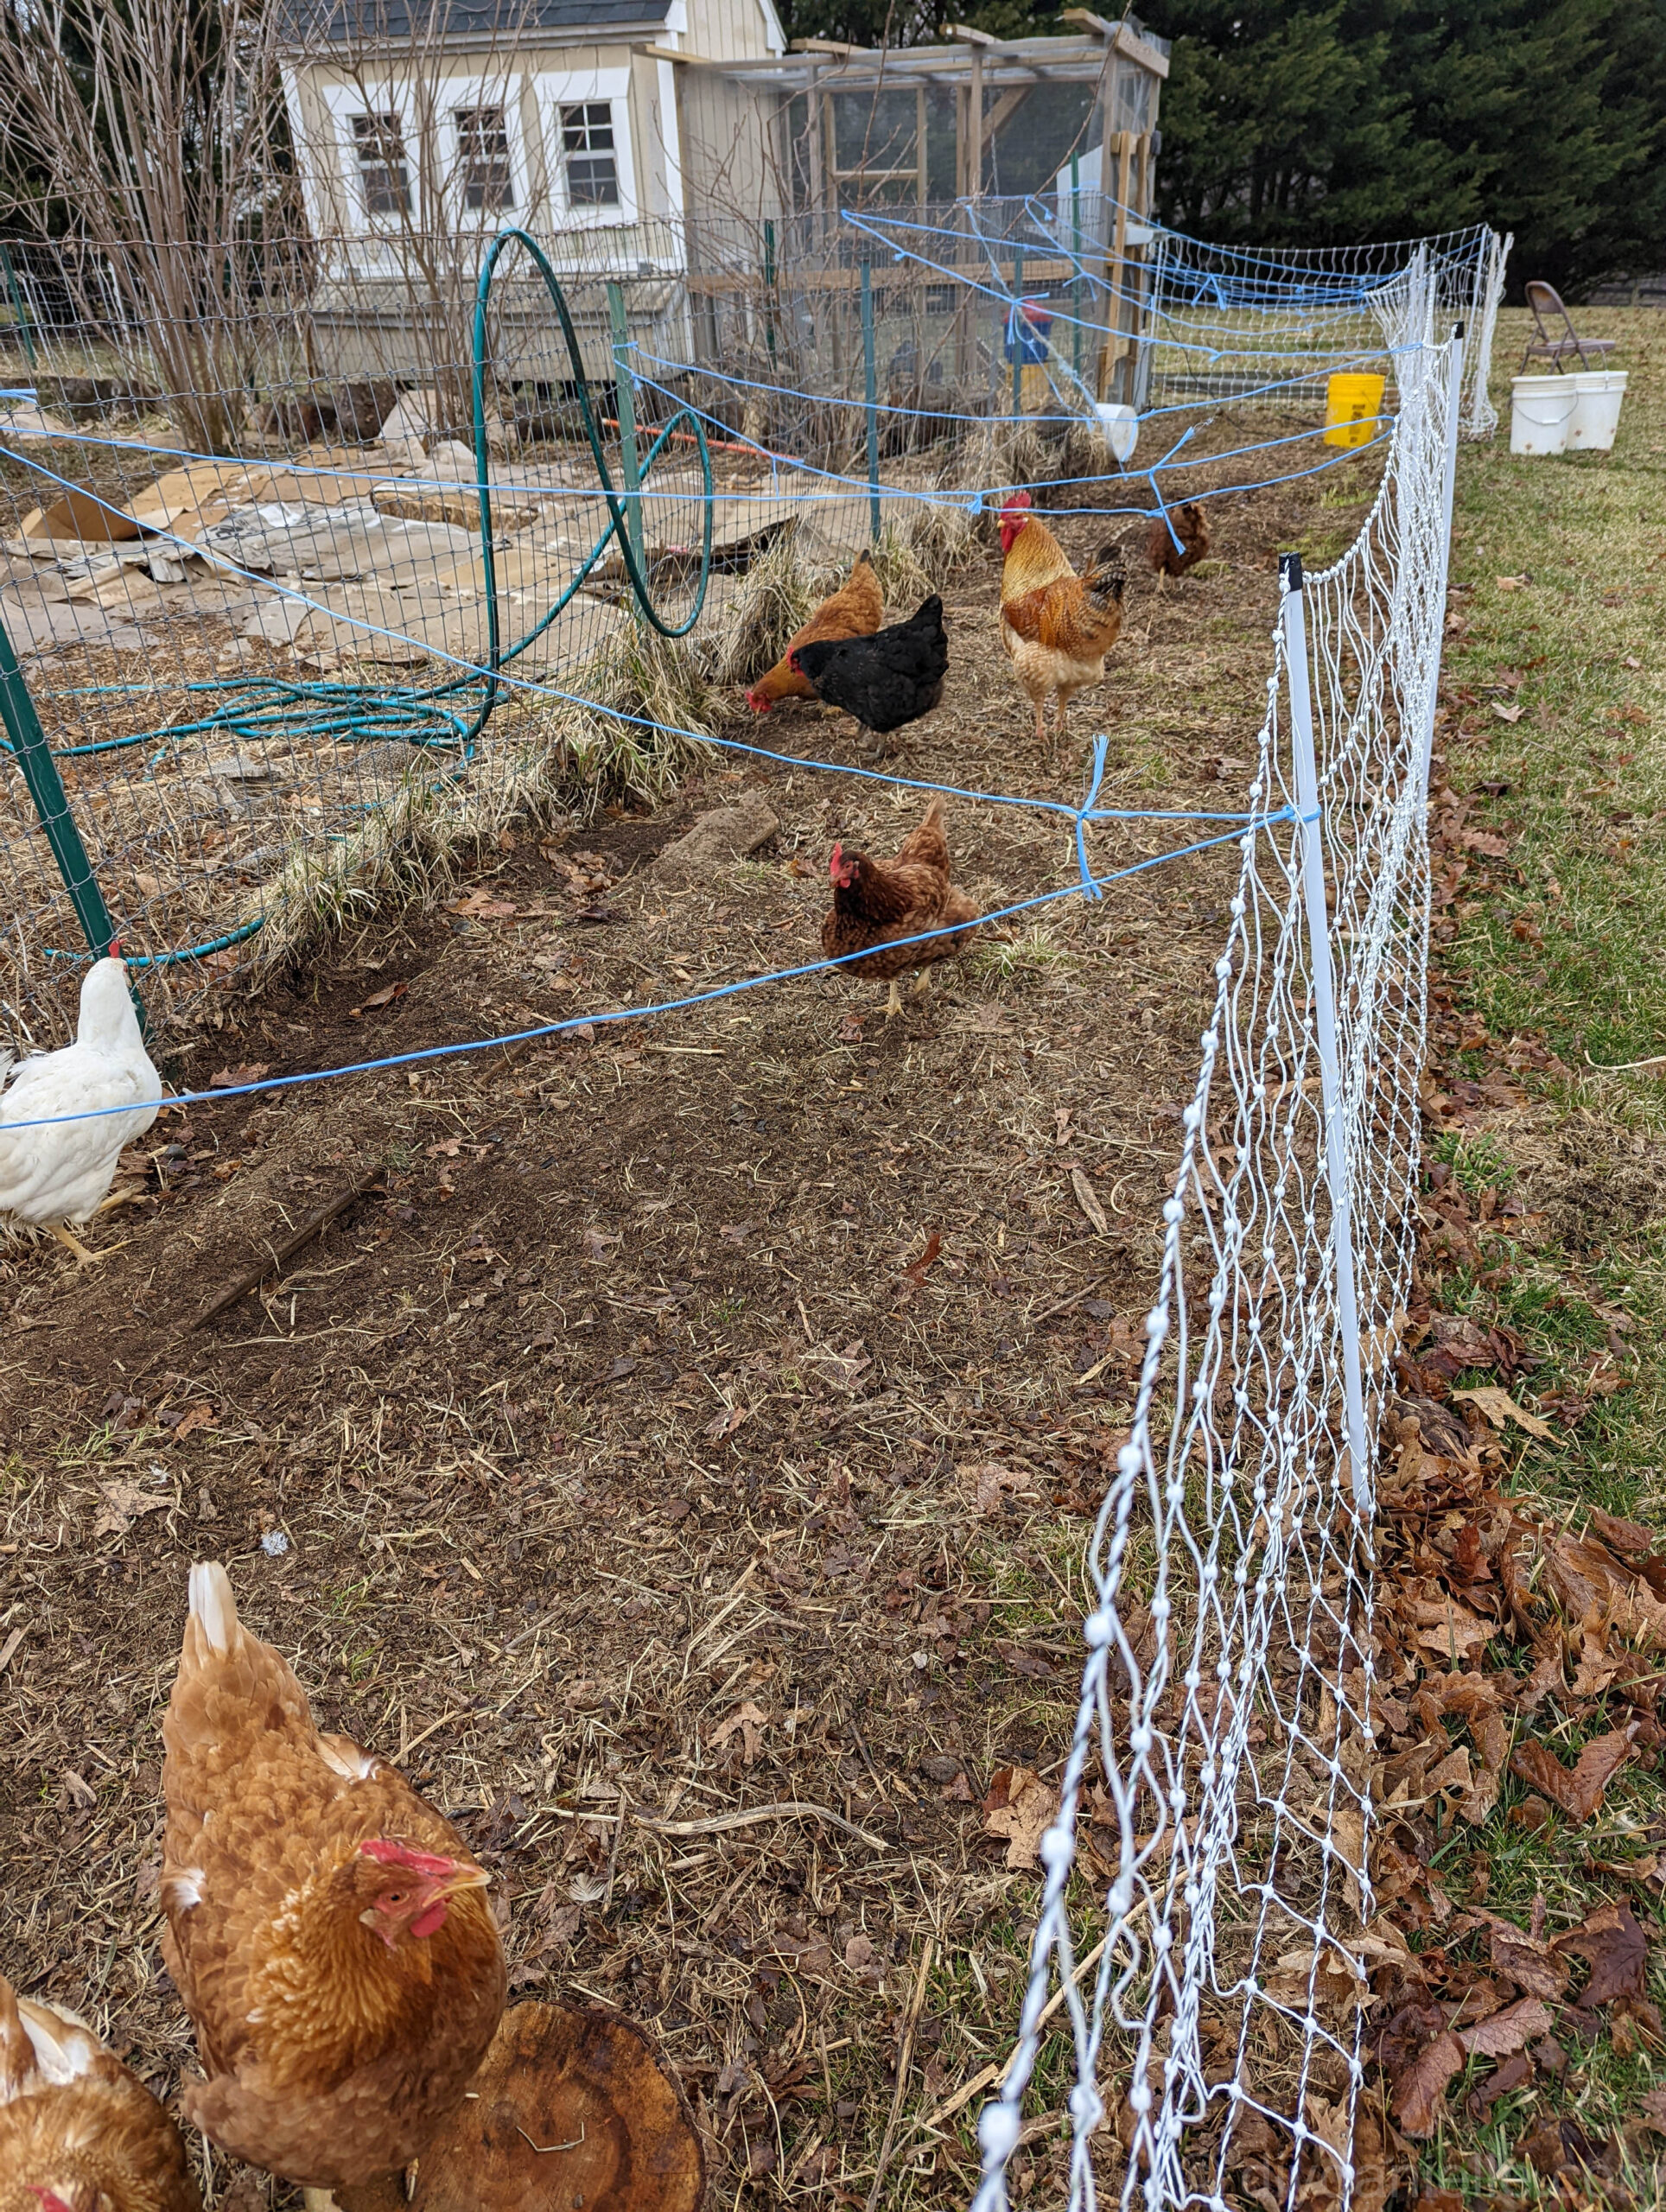 Access to vegetable bed when using chicken wire fence? : r/gardening